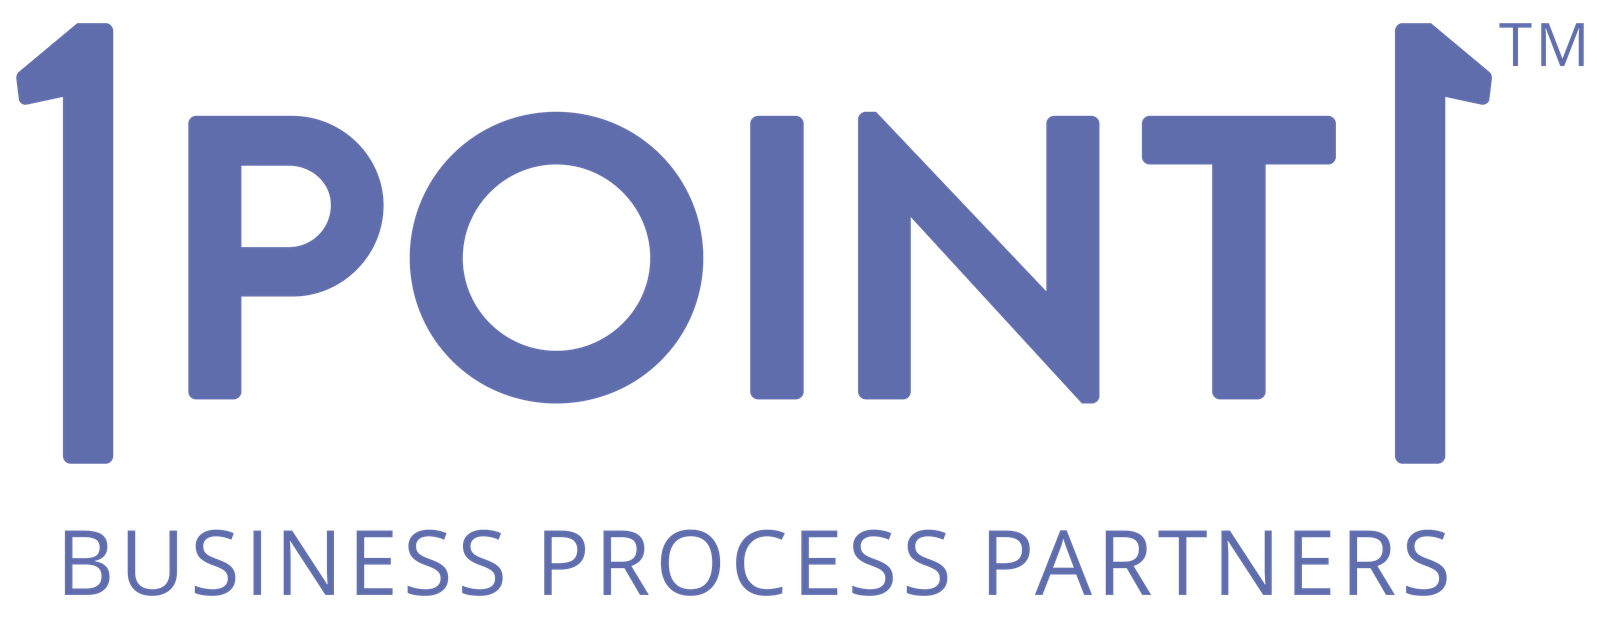 logo One Point One Solutions Limited Campus Placement